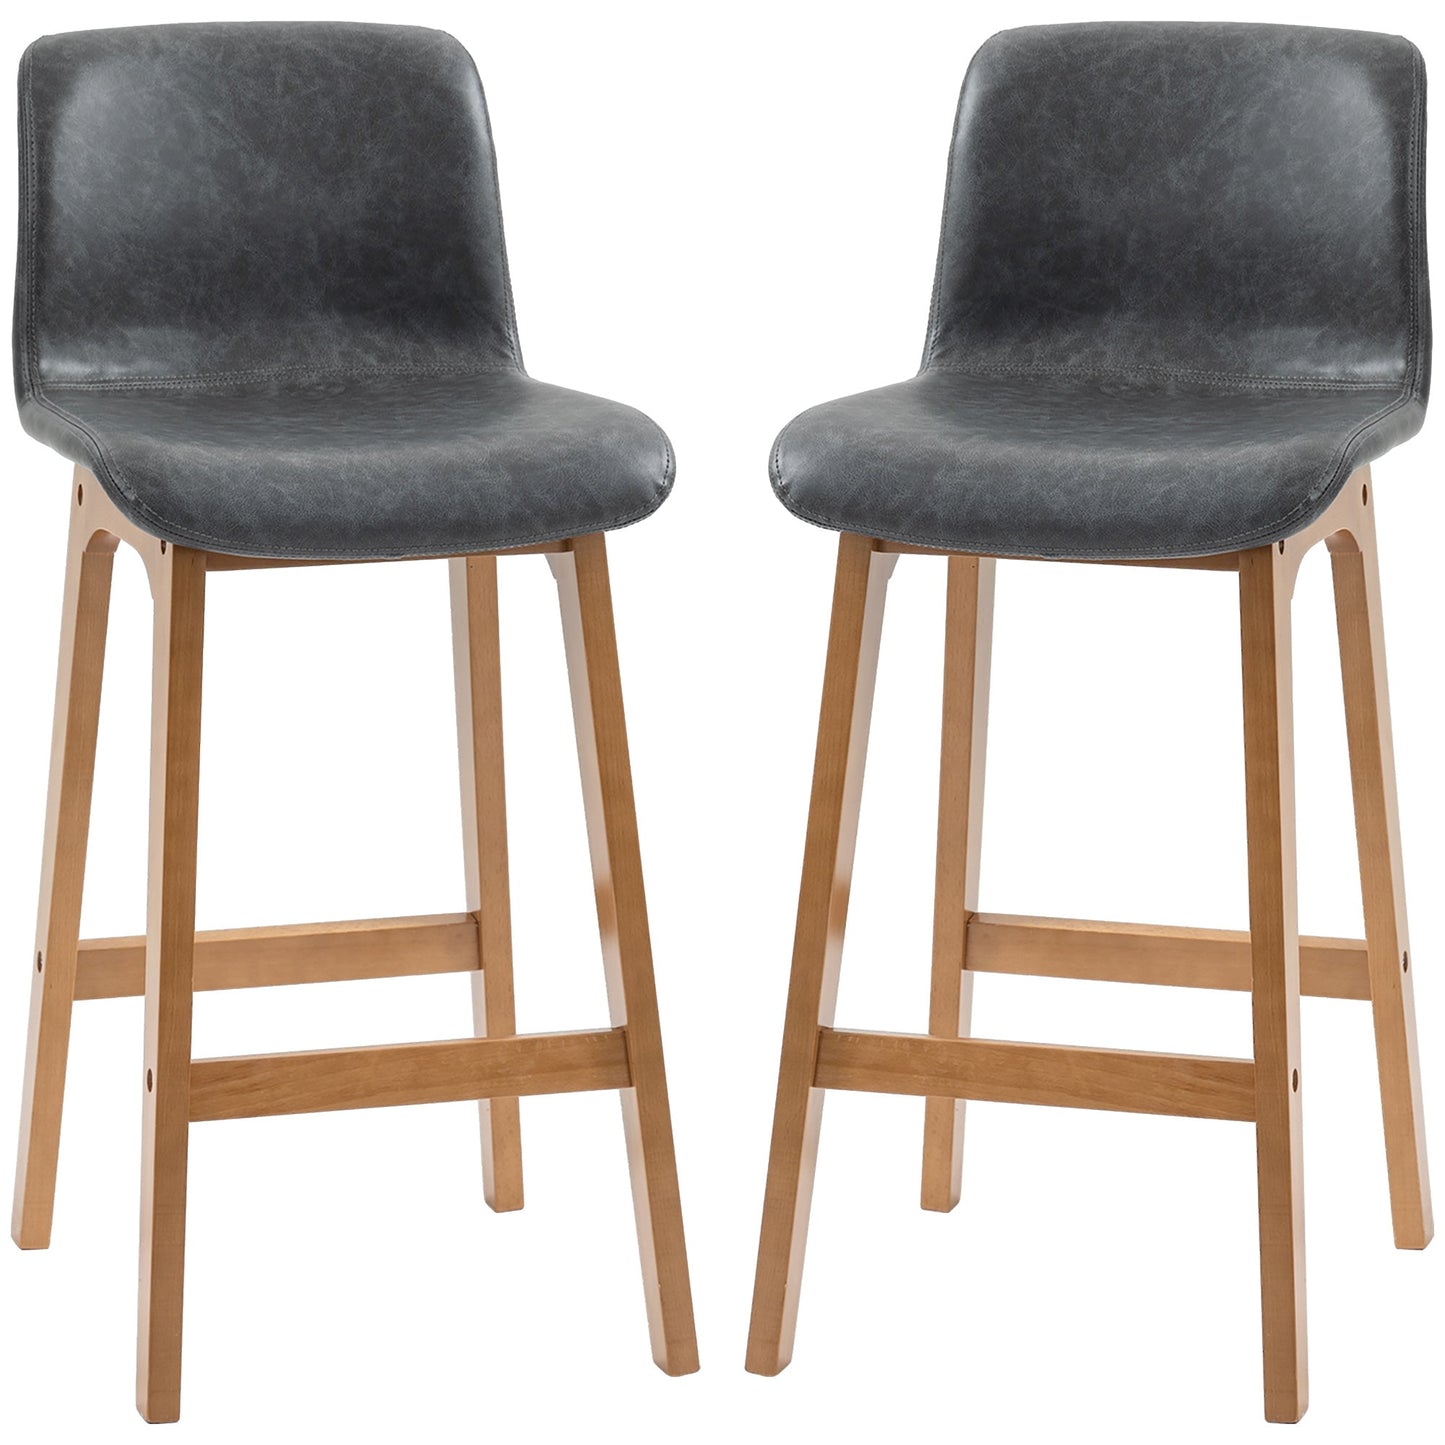 Modern Bar Stools Set of 2, Counter Height Bar Chair with PU Leather Wooden Frame Padding Seats for Dining Room Home Bar, Grey - Gallery Canada